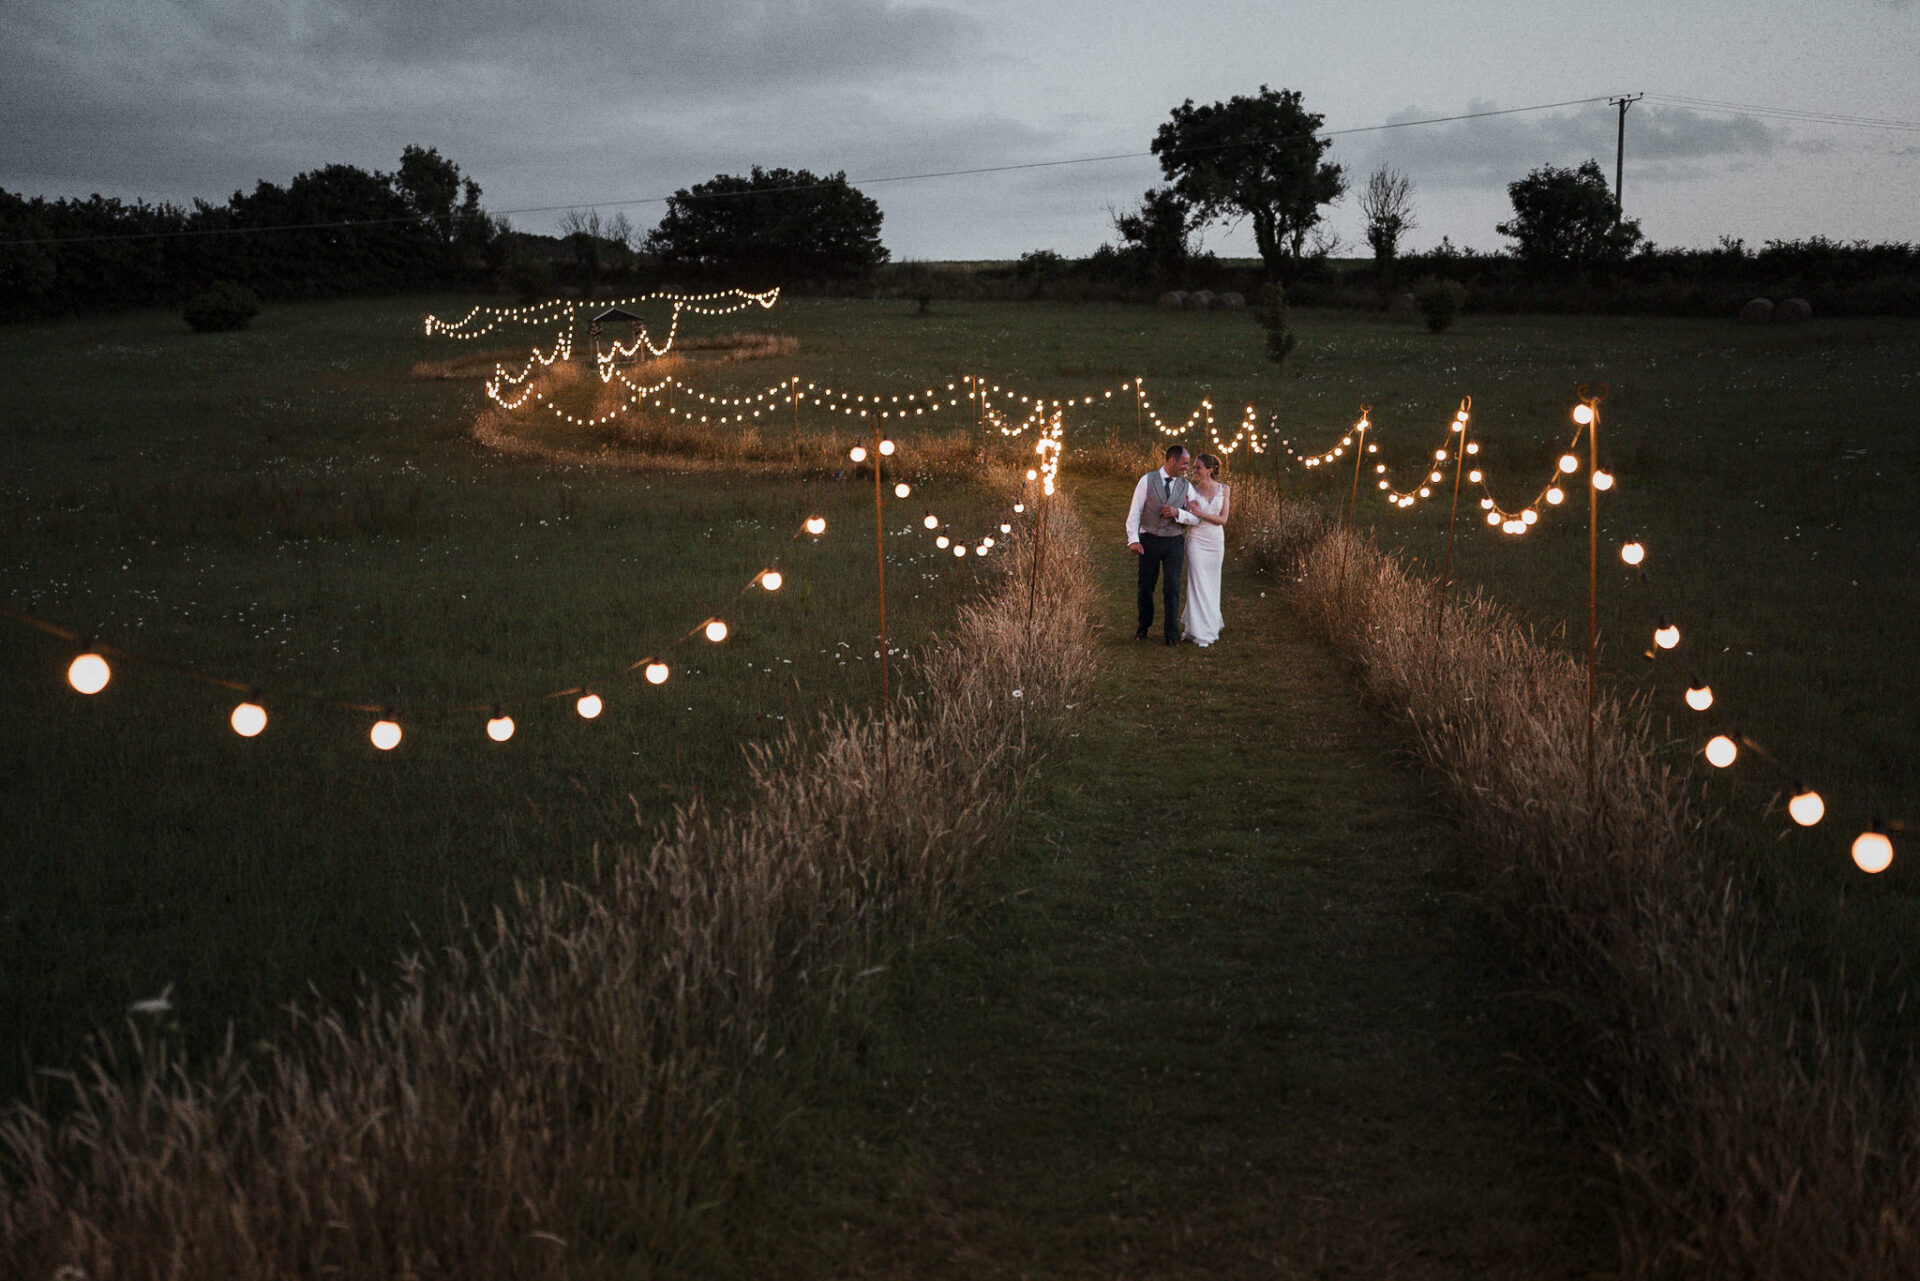 A recent wedding with a bride and groom standing in a field with string lights.